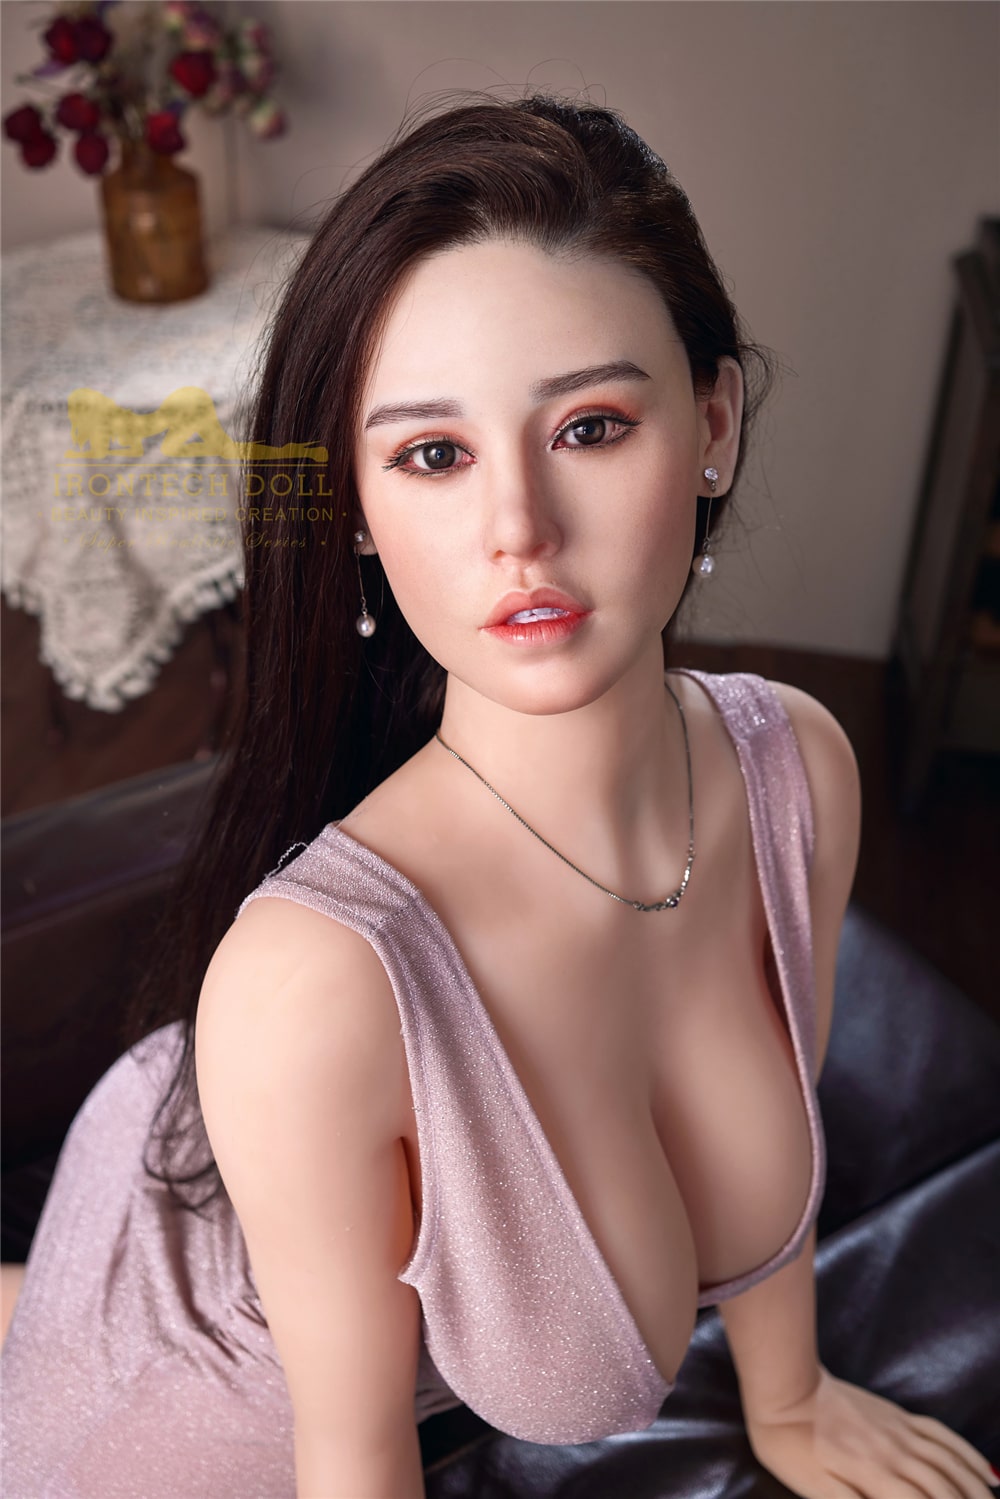 Katana Busty Japanese Sex Doll picture